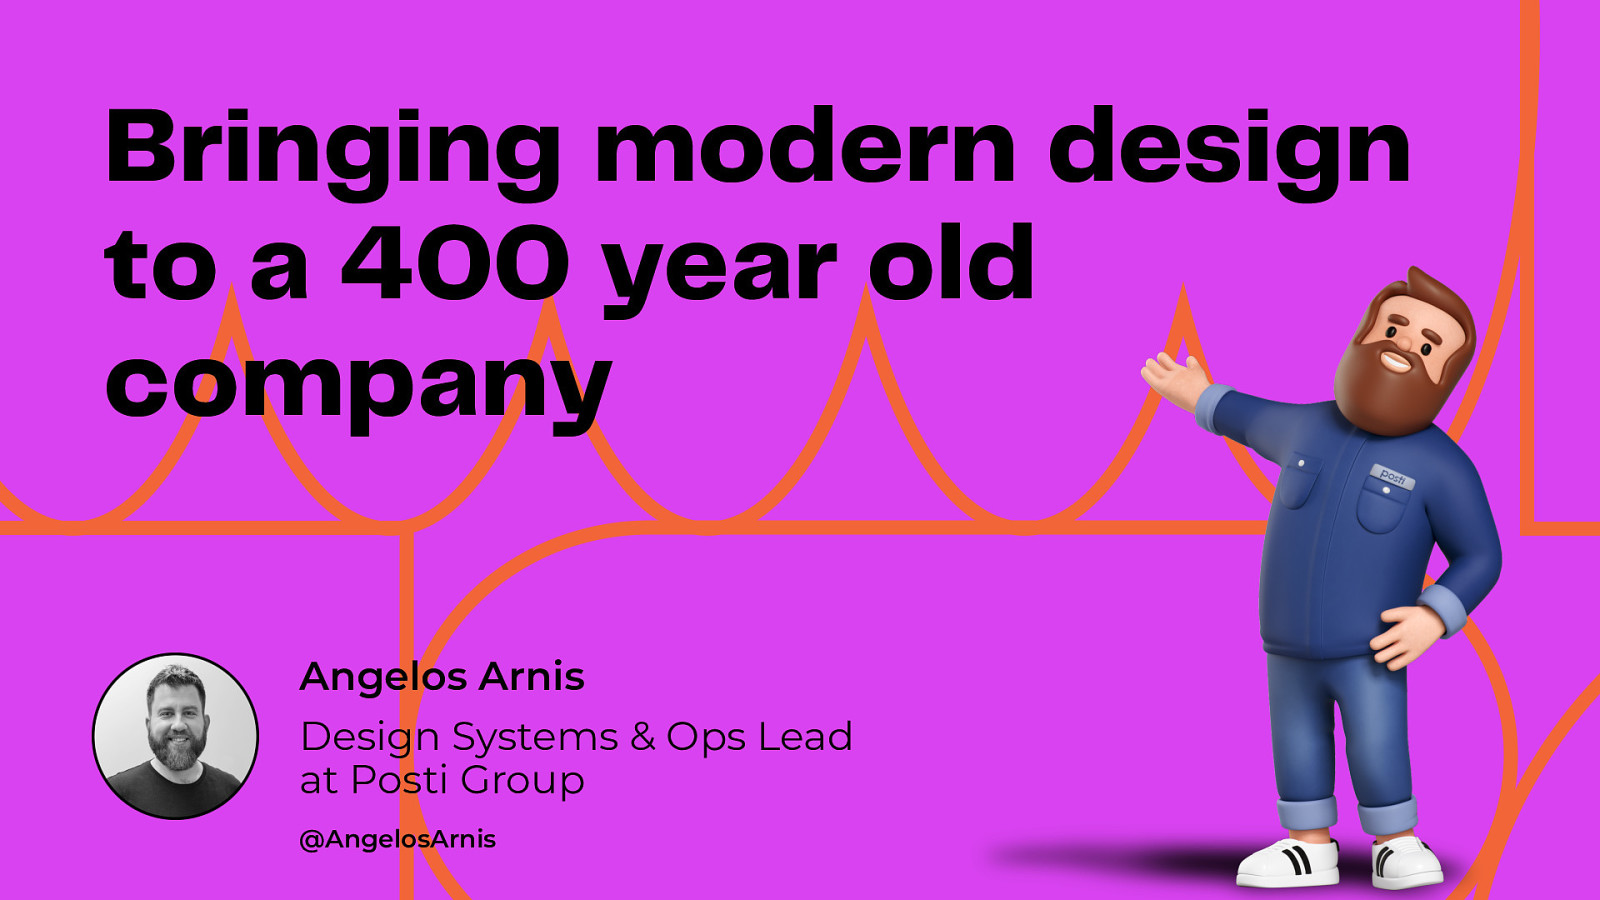 Bringing modern design to a 400 year old company